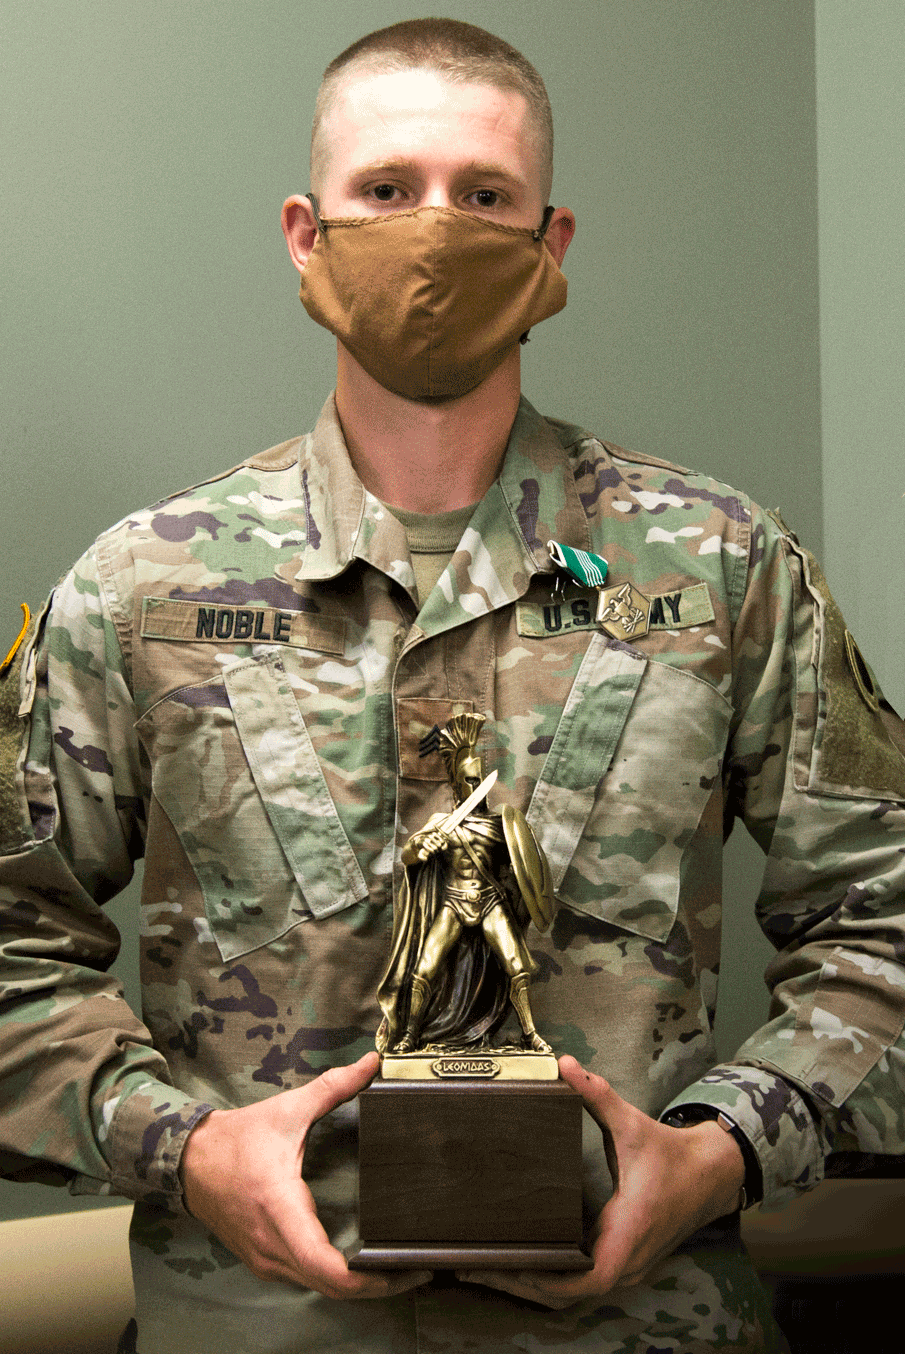 Noble with award